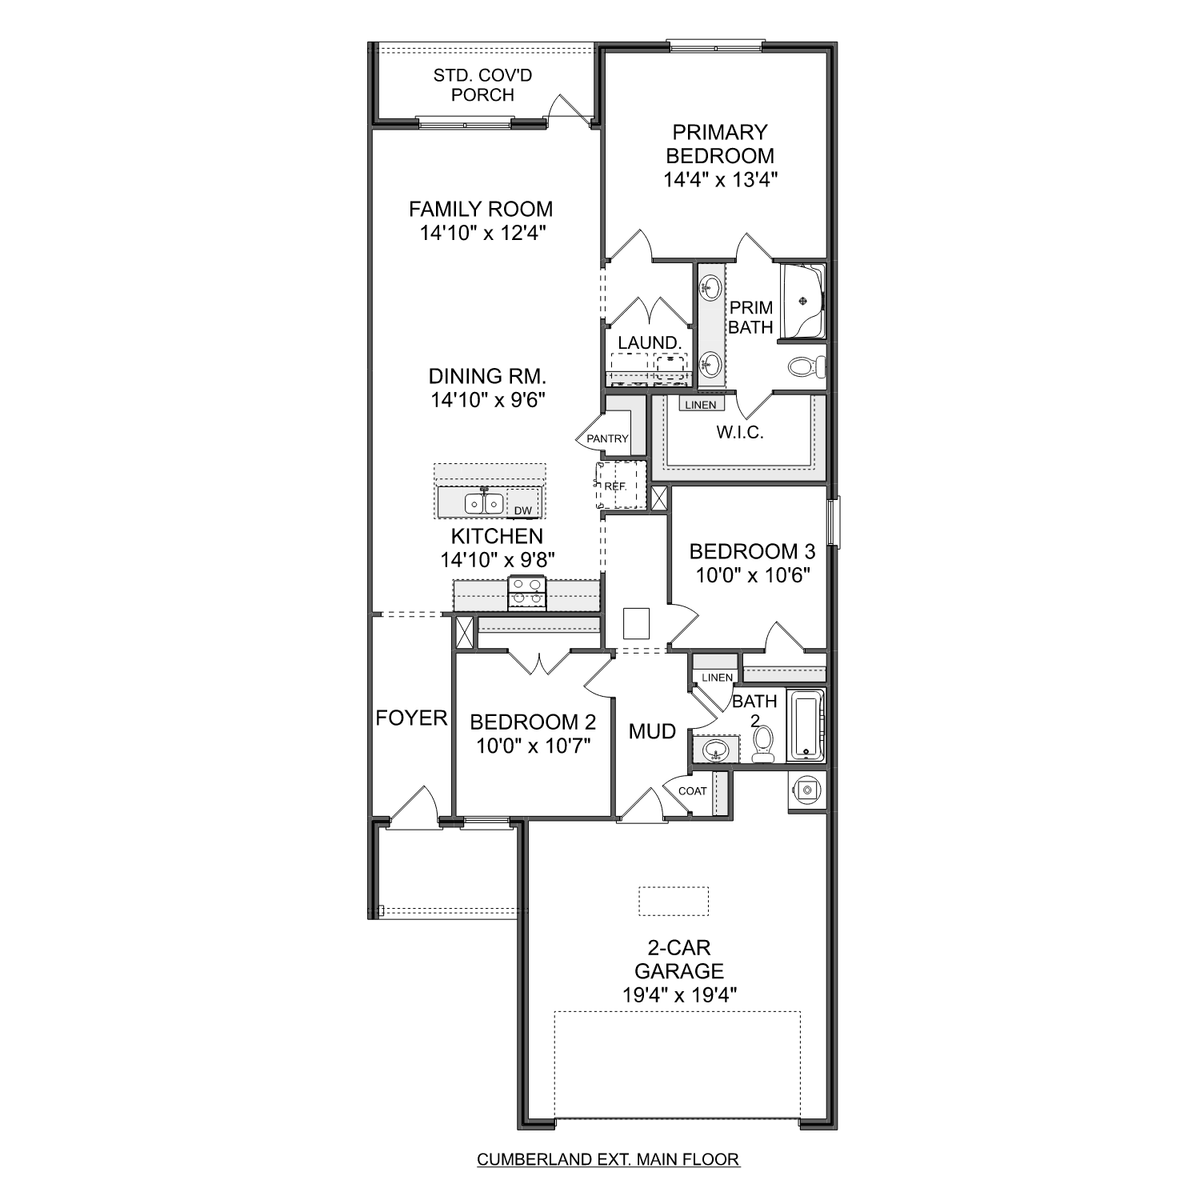 1 - The Cumberland floor plan layout for 3143 Lea Lane SE in Davidson Homes' Hollon Meadow community.